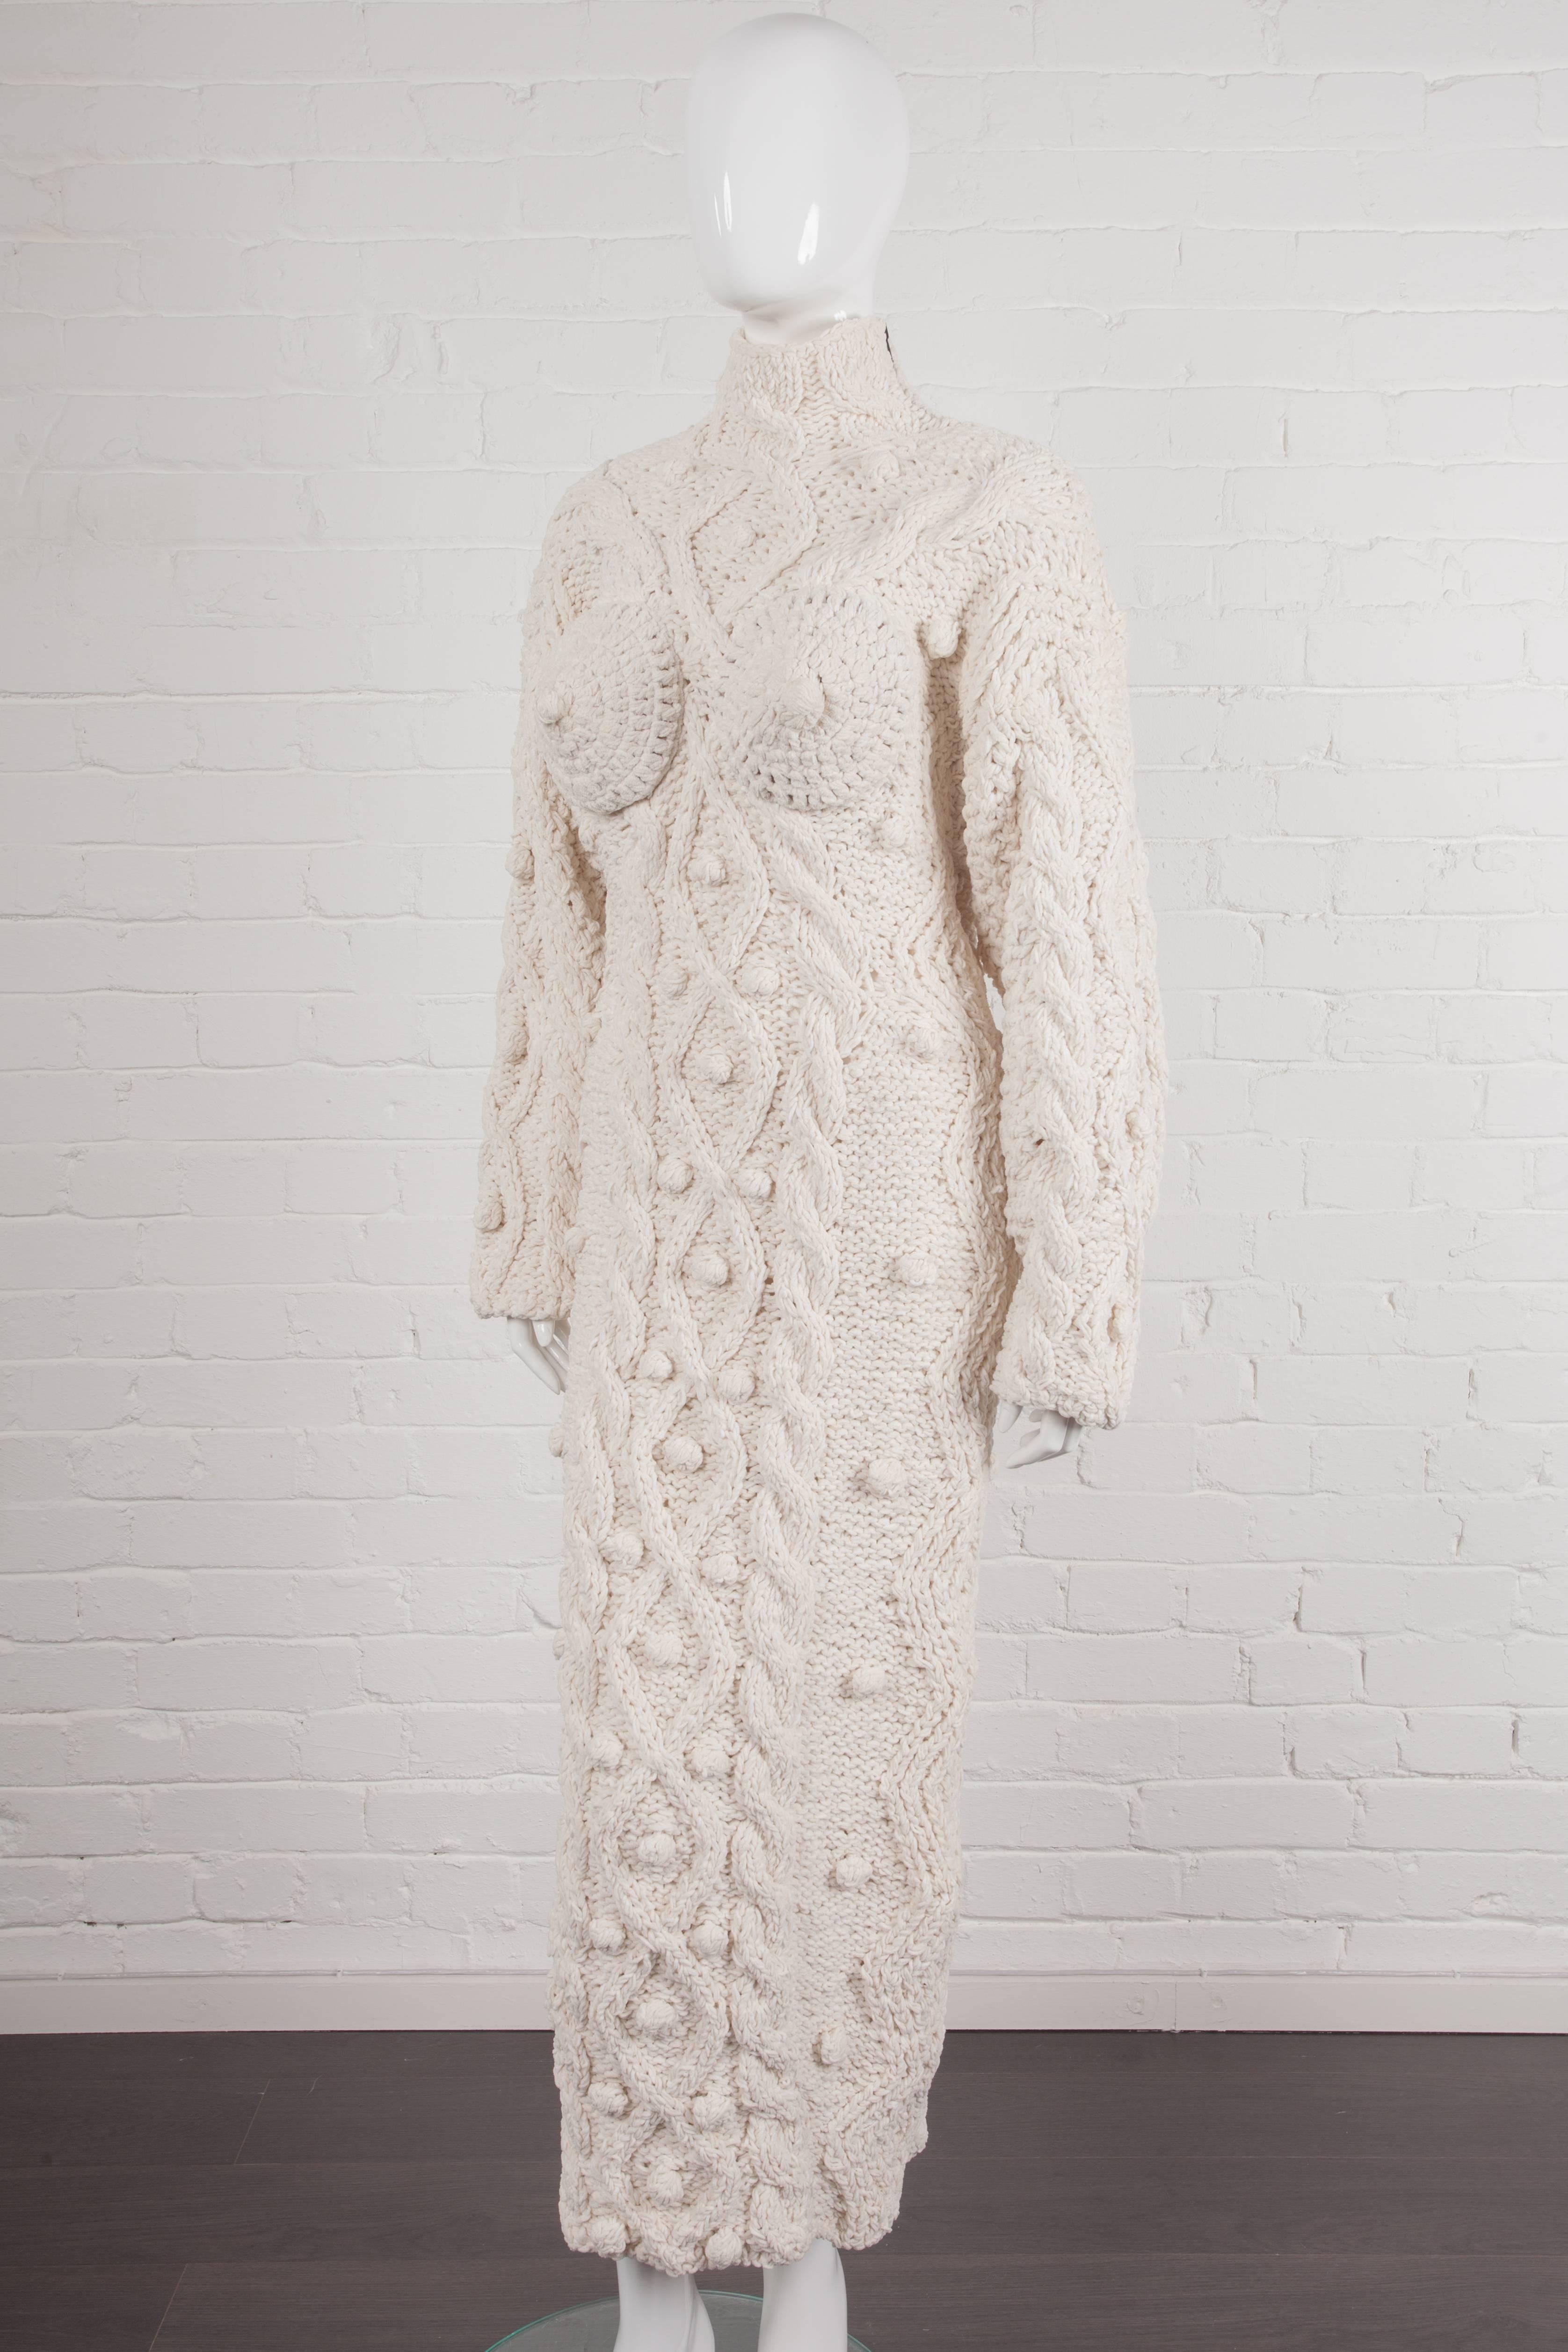 Vintage Aran Knit Cones Dress.

Off white cotton chenille yarn Aran knit long breast cones dress from Jean Paul Gaultier  Fall/Winter 1985/86 “The Uptide Charme of the Bourgeoisie” Collection featuring a high crew neck, a metal zip opening at the